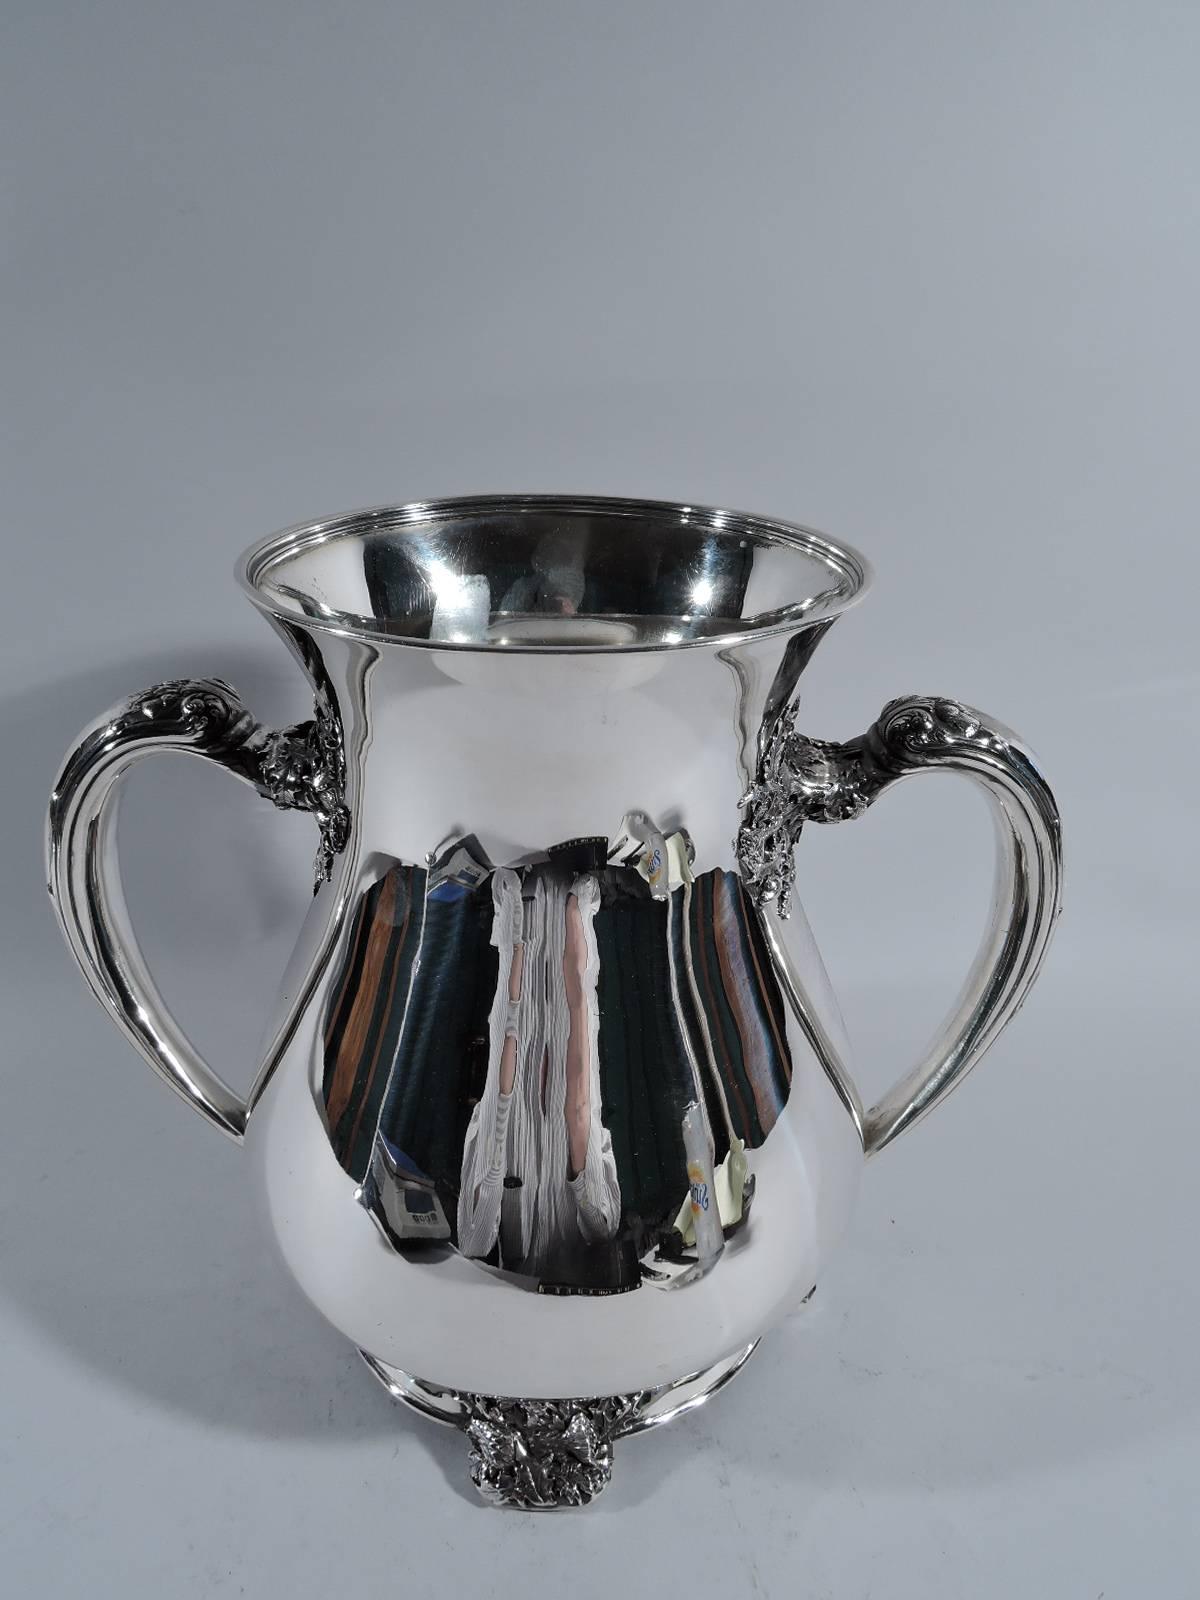 Sterling silver trophy cup. Made by Tiffany & Co. in New York, circa 1900. Ovoid body, flared mouth, and c-scroll handles with realistic leaf and bud mounts. Spread foot has same applied to four supports. Interior has gilt wash. A Fine design with